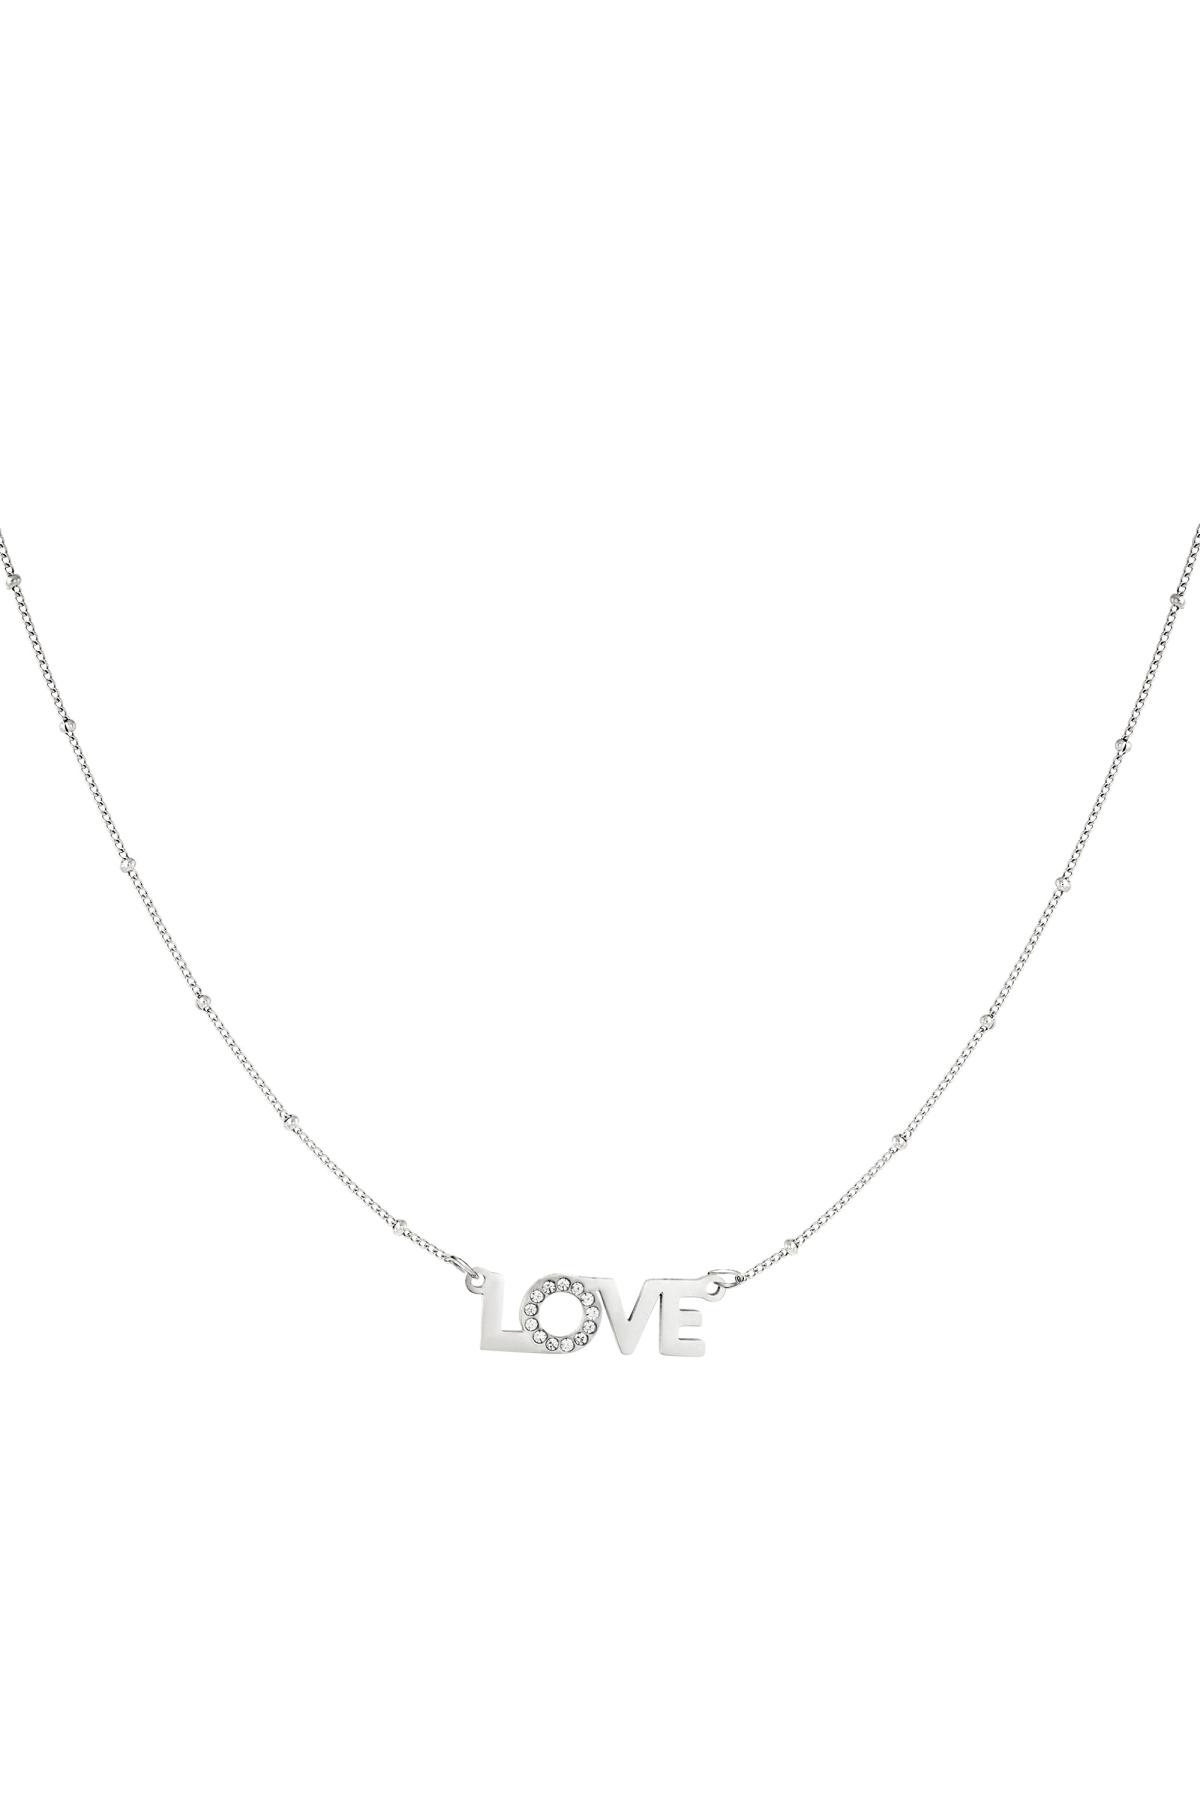 Stainless steel necklace love Silver